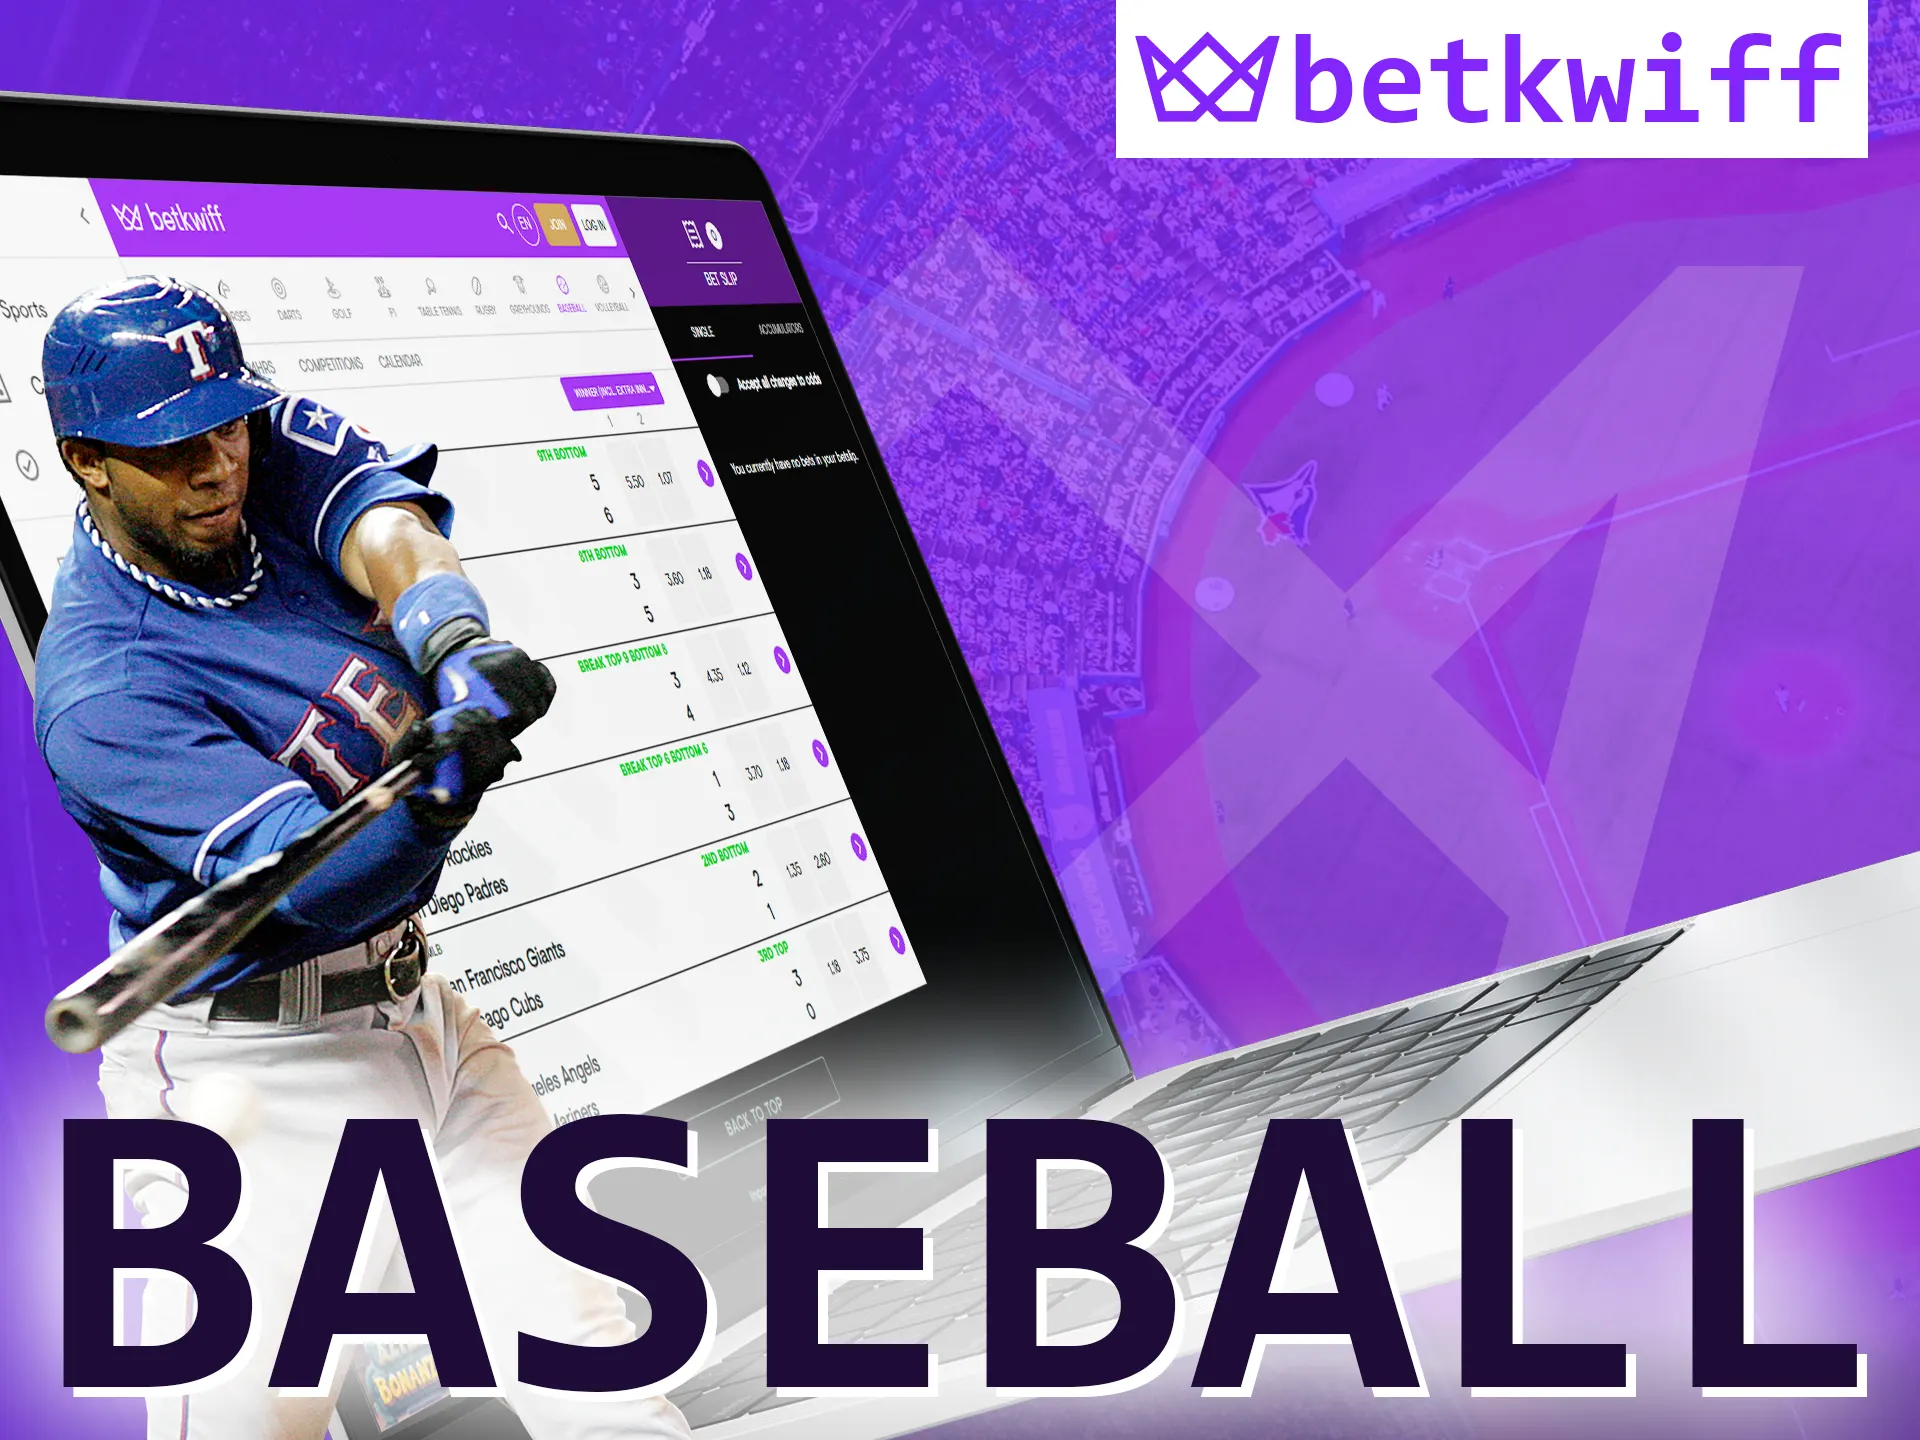 At Betkwiff, place your baseball bets.